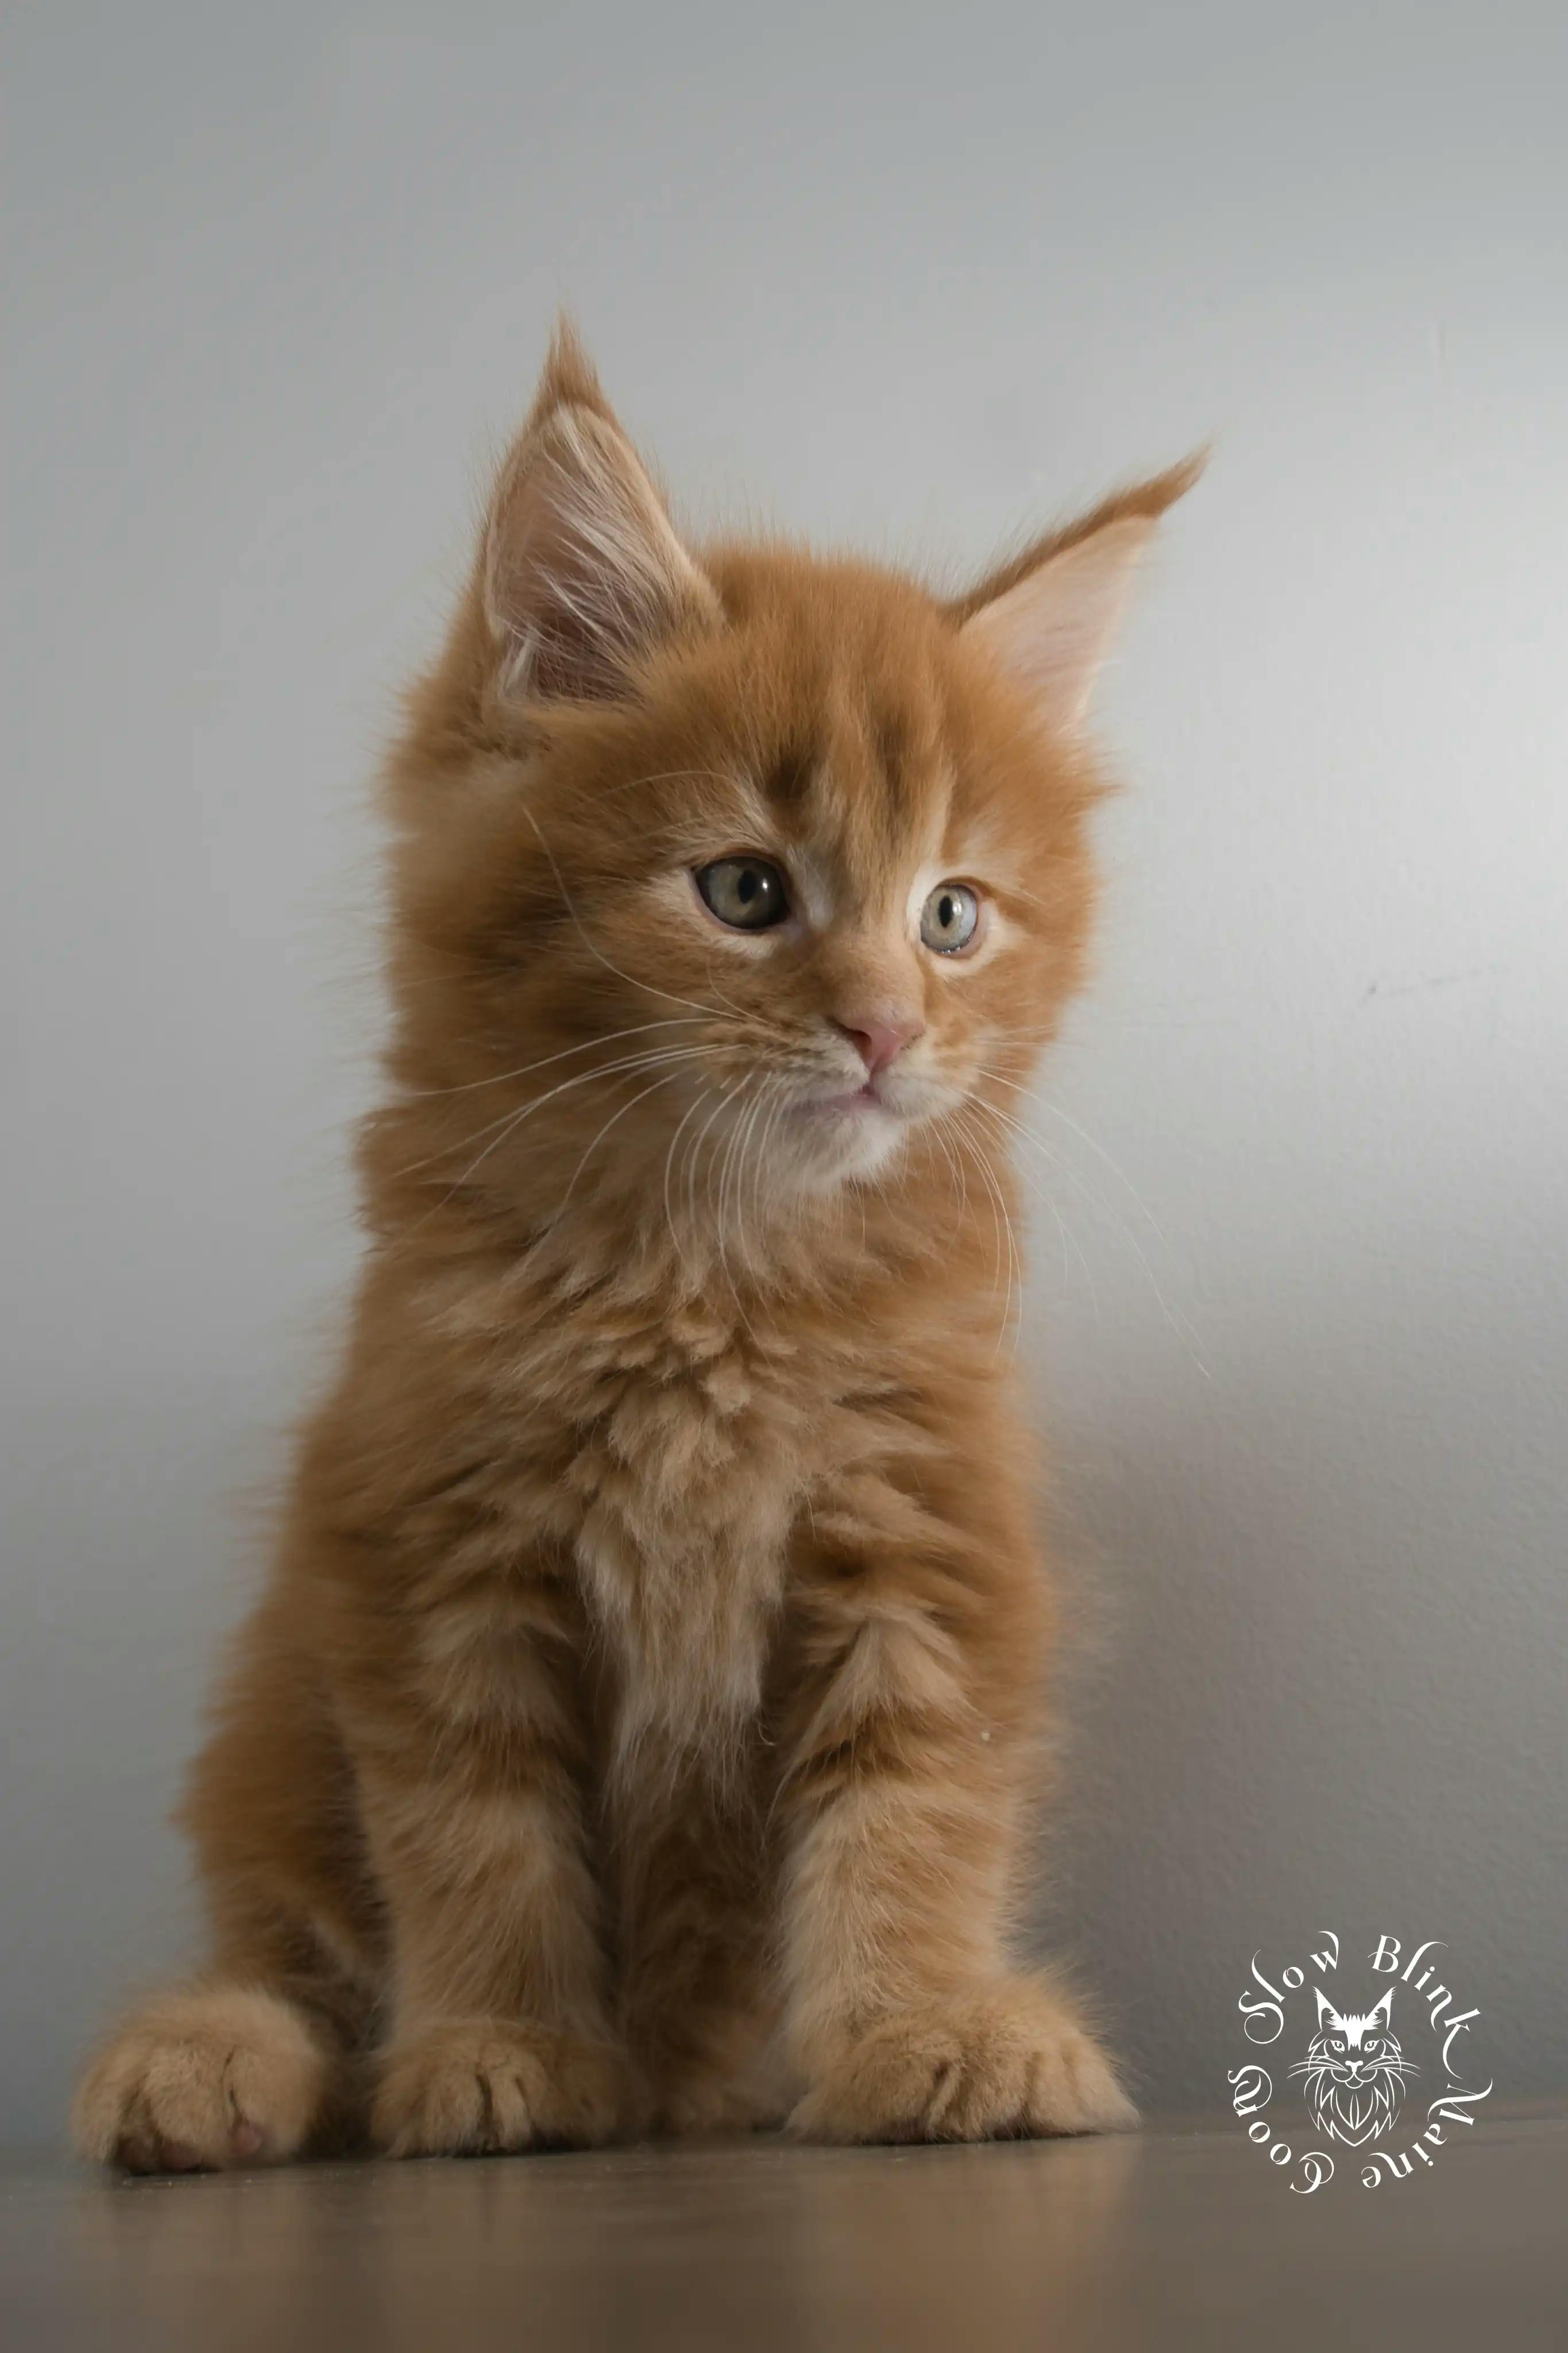 Orange (Red) Maine Coon Kittens > red orange maine coon kitten | slowblinkmainecoons | ems code d ds ds 22 1 11